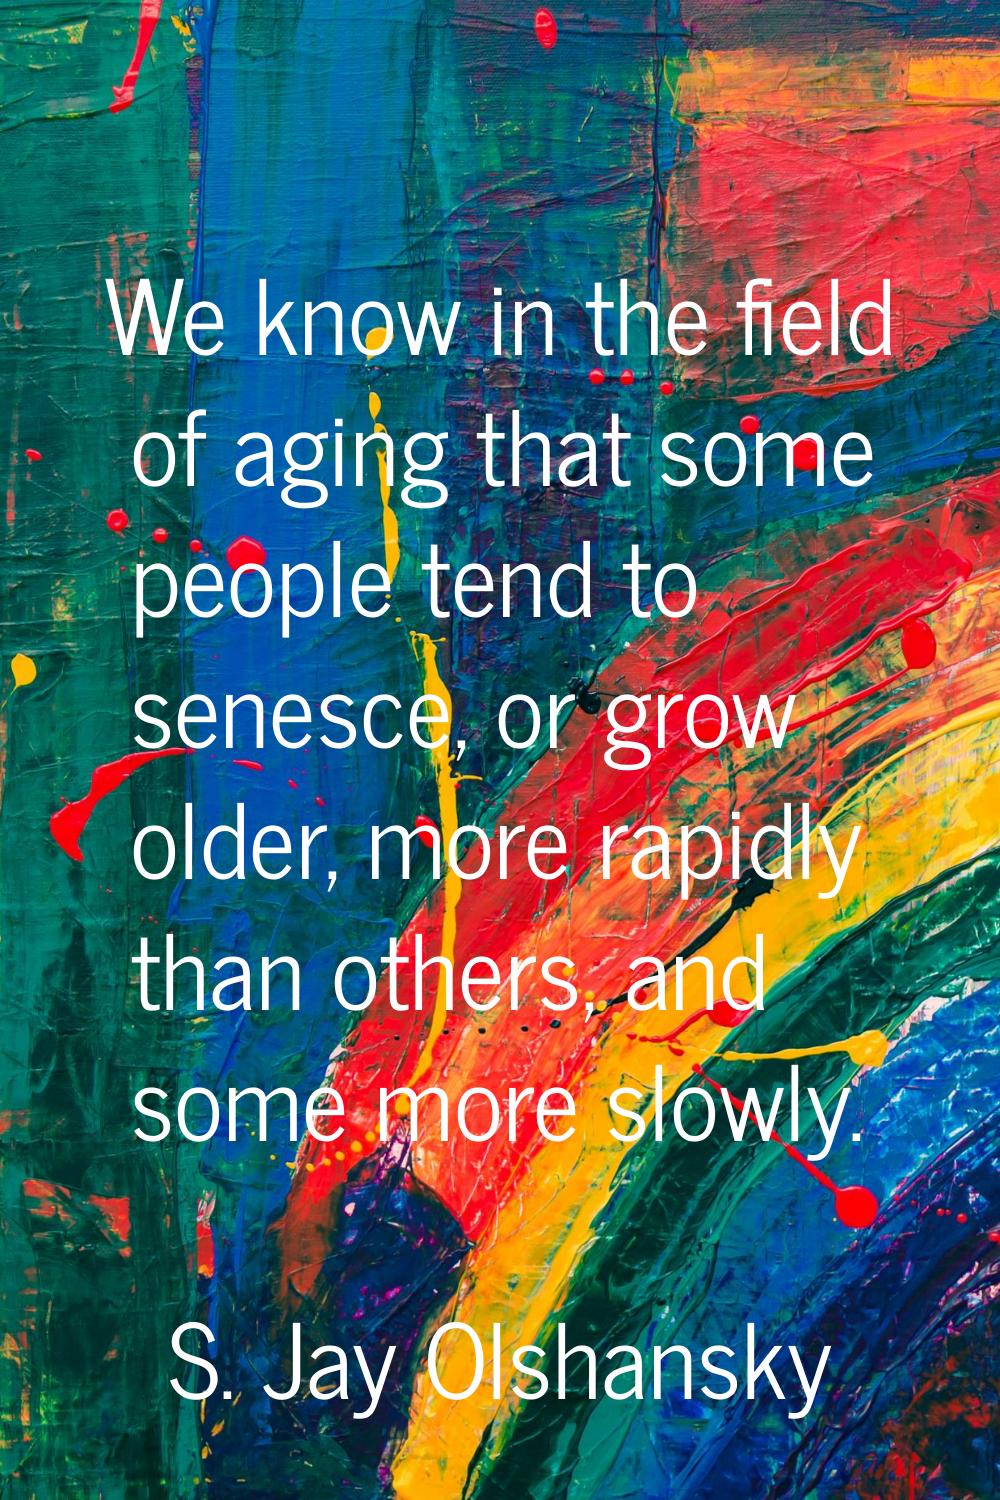 We know in the field of aging that some people tend to senesce, or grow older, more rapidly than ot